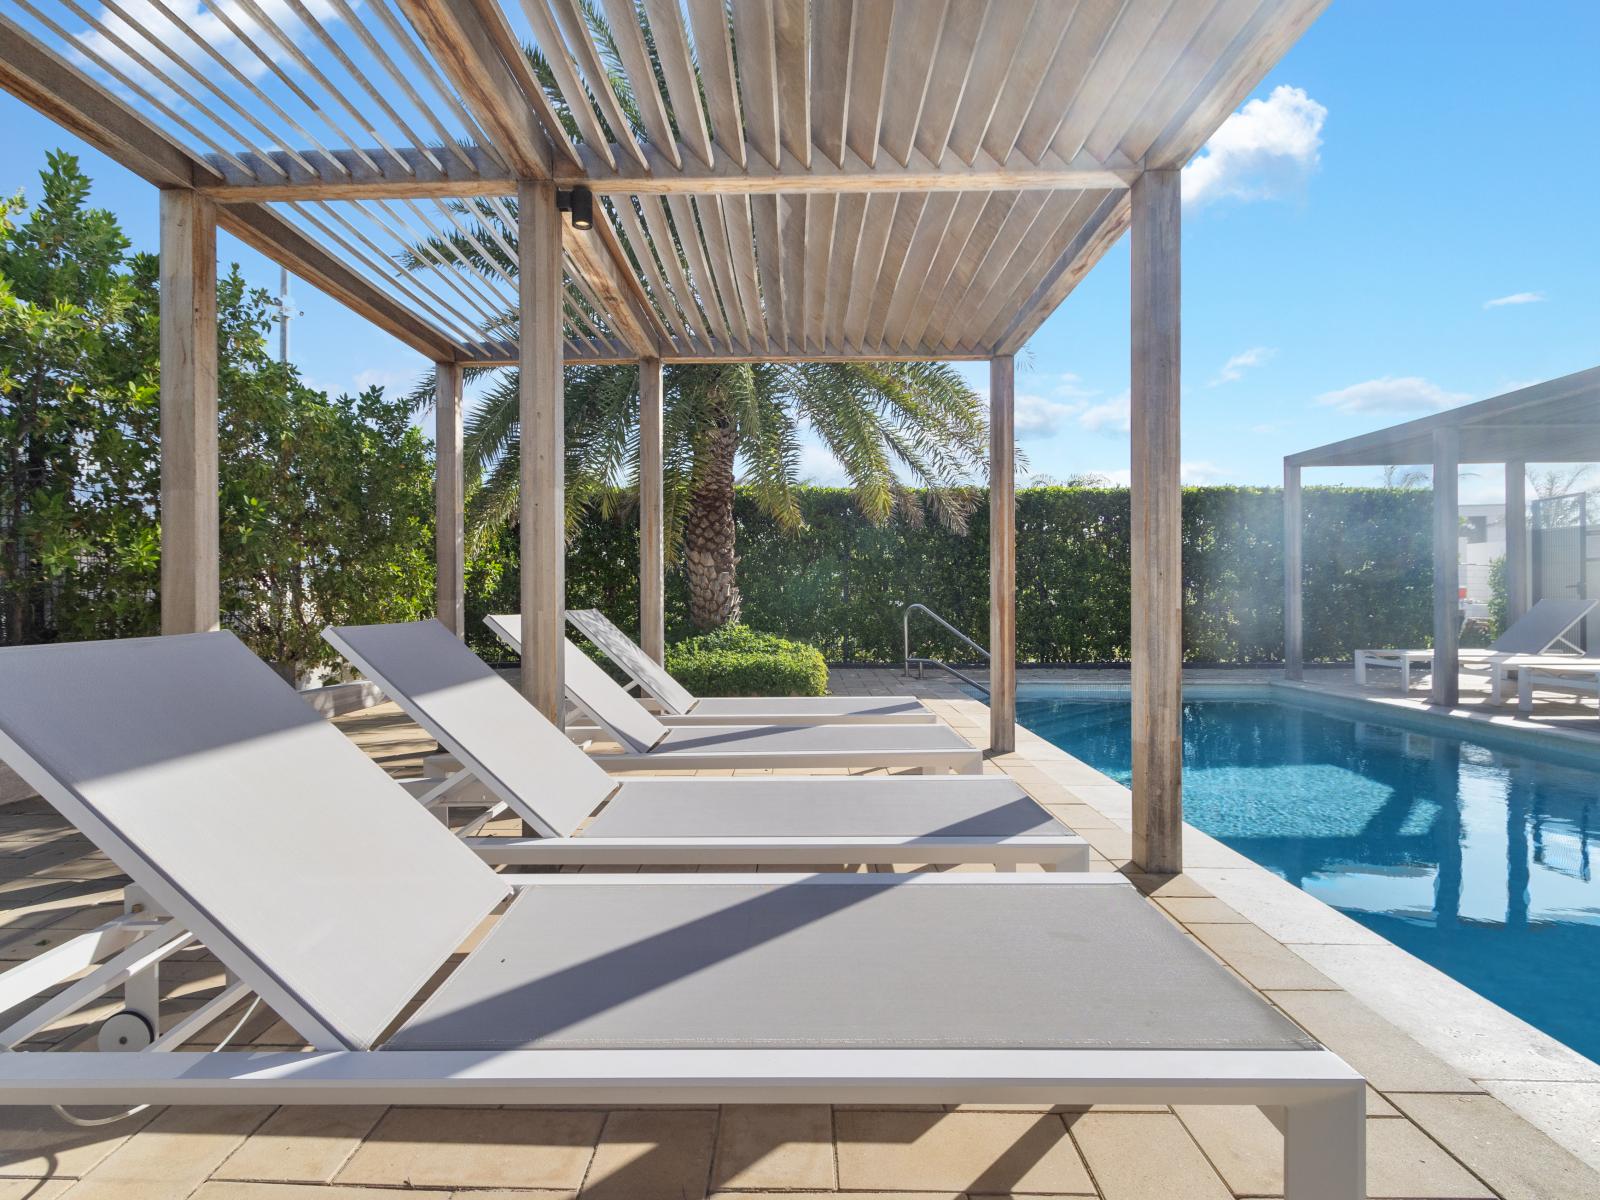 Relax under the shade at the Tuscany residence community pool